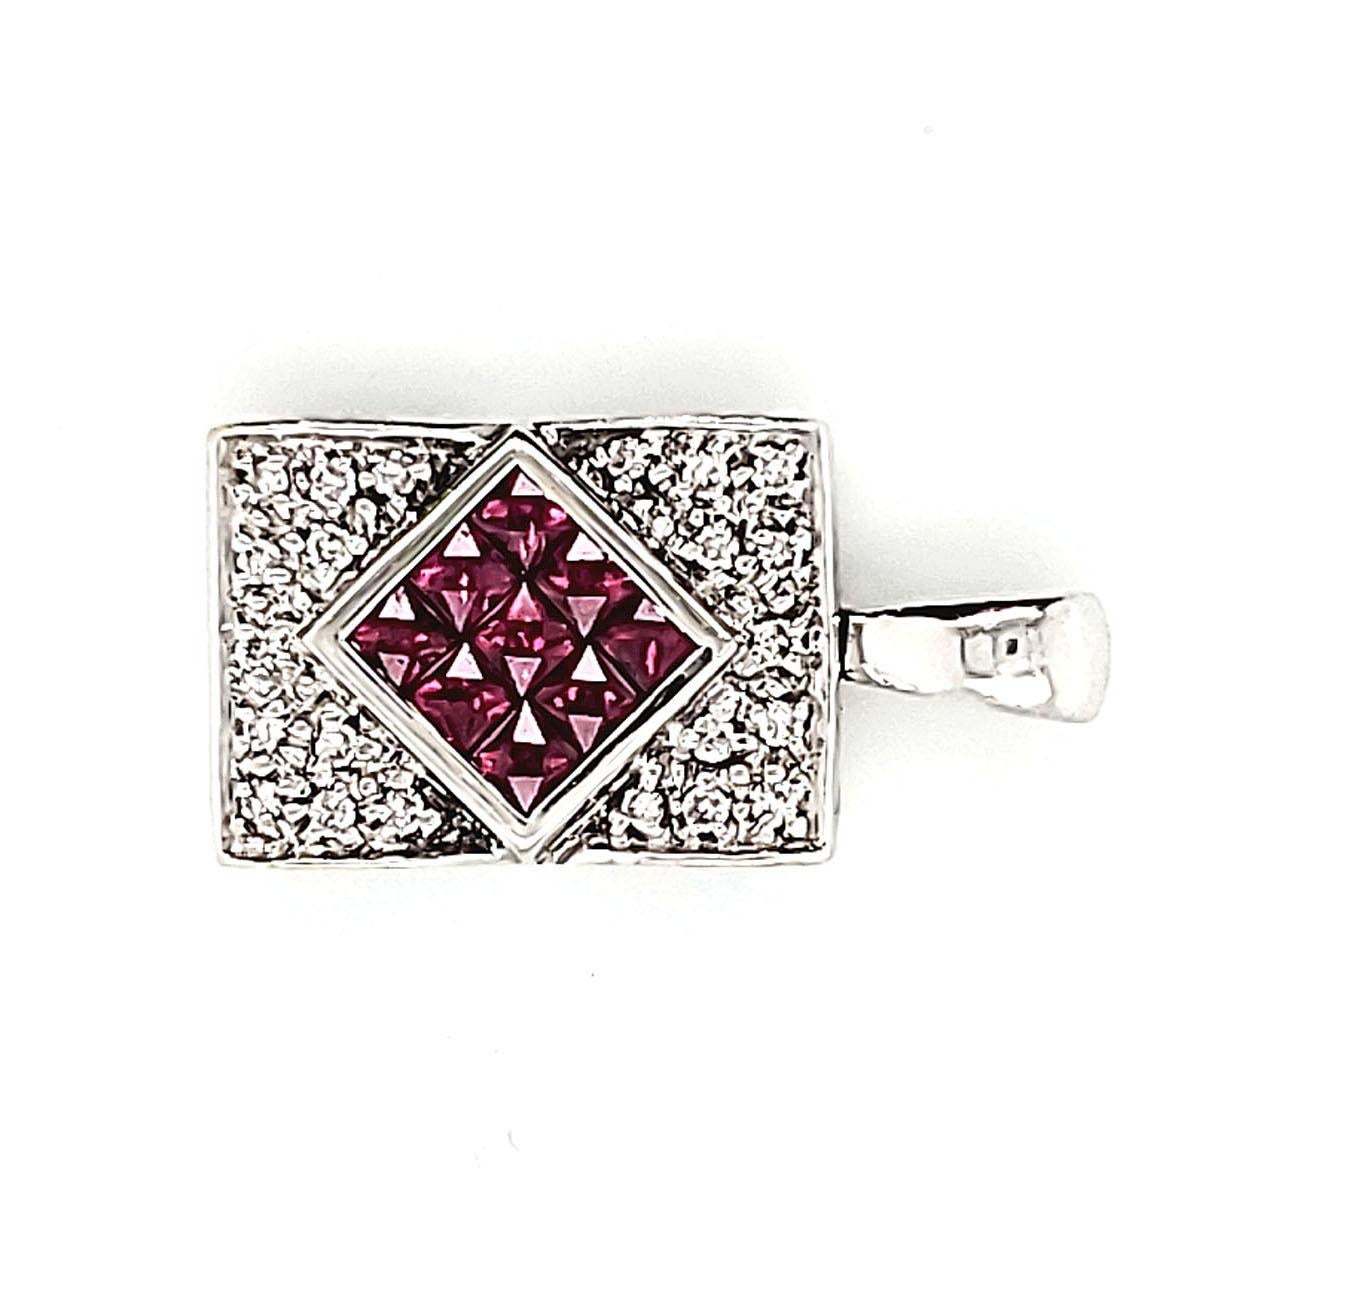 The 1.57 Carat Ruby and White Diamond Pendant Necklace from Shimon's Creations features a gorgeous white diamond rectangle with 9 dazzling rubies in the middle of the pendant. This gorgeous pendant is 18k white gold and has 40 white diamonds. This